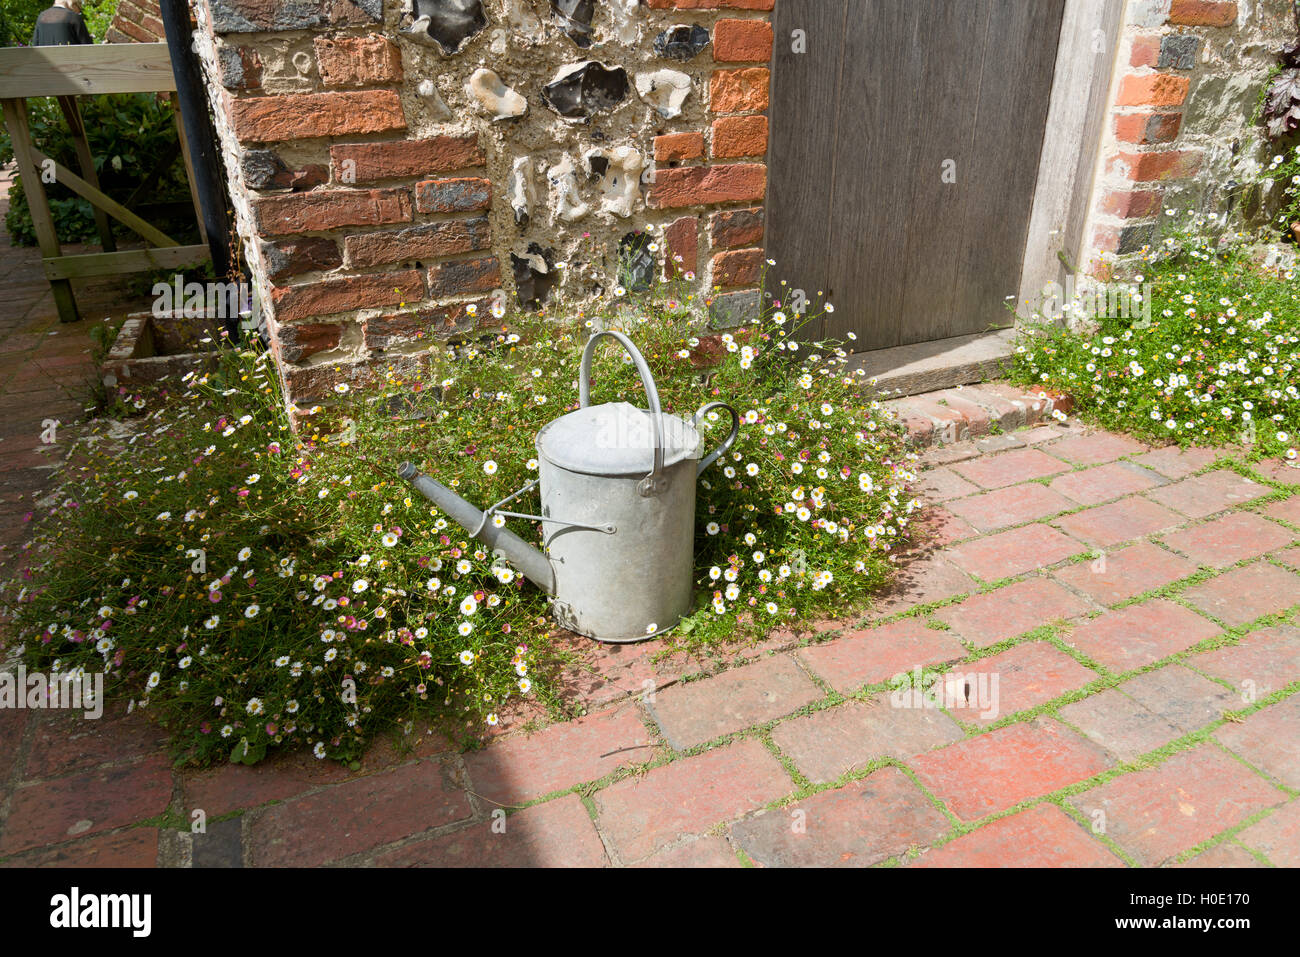 Old galvanised metal watering can on a brick path with flint stone wall behind. Santa Barbara /  Mexican daisy plants. Stock Photo